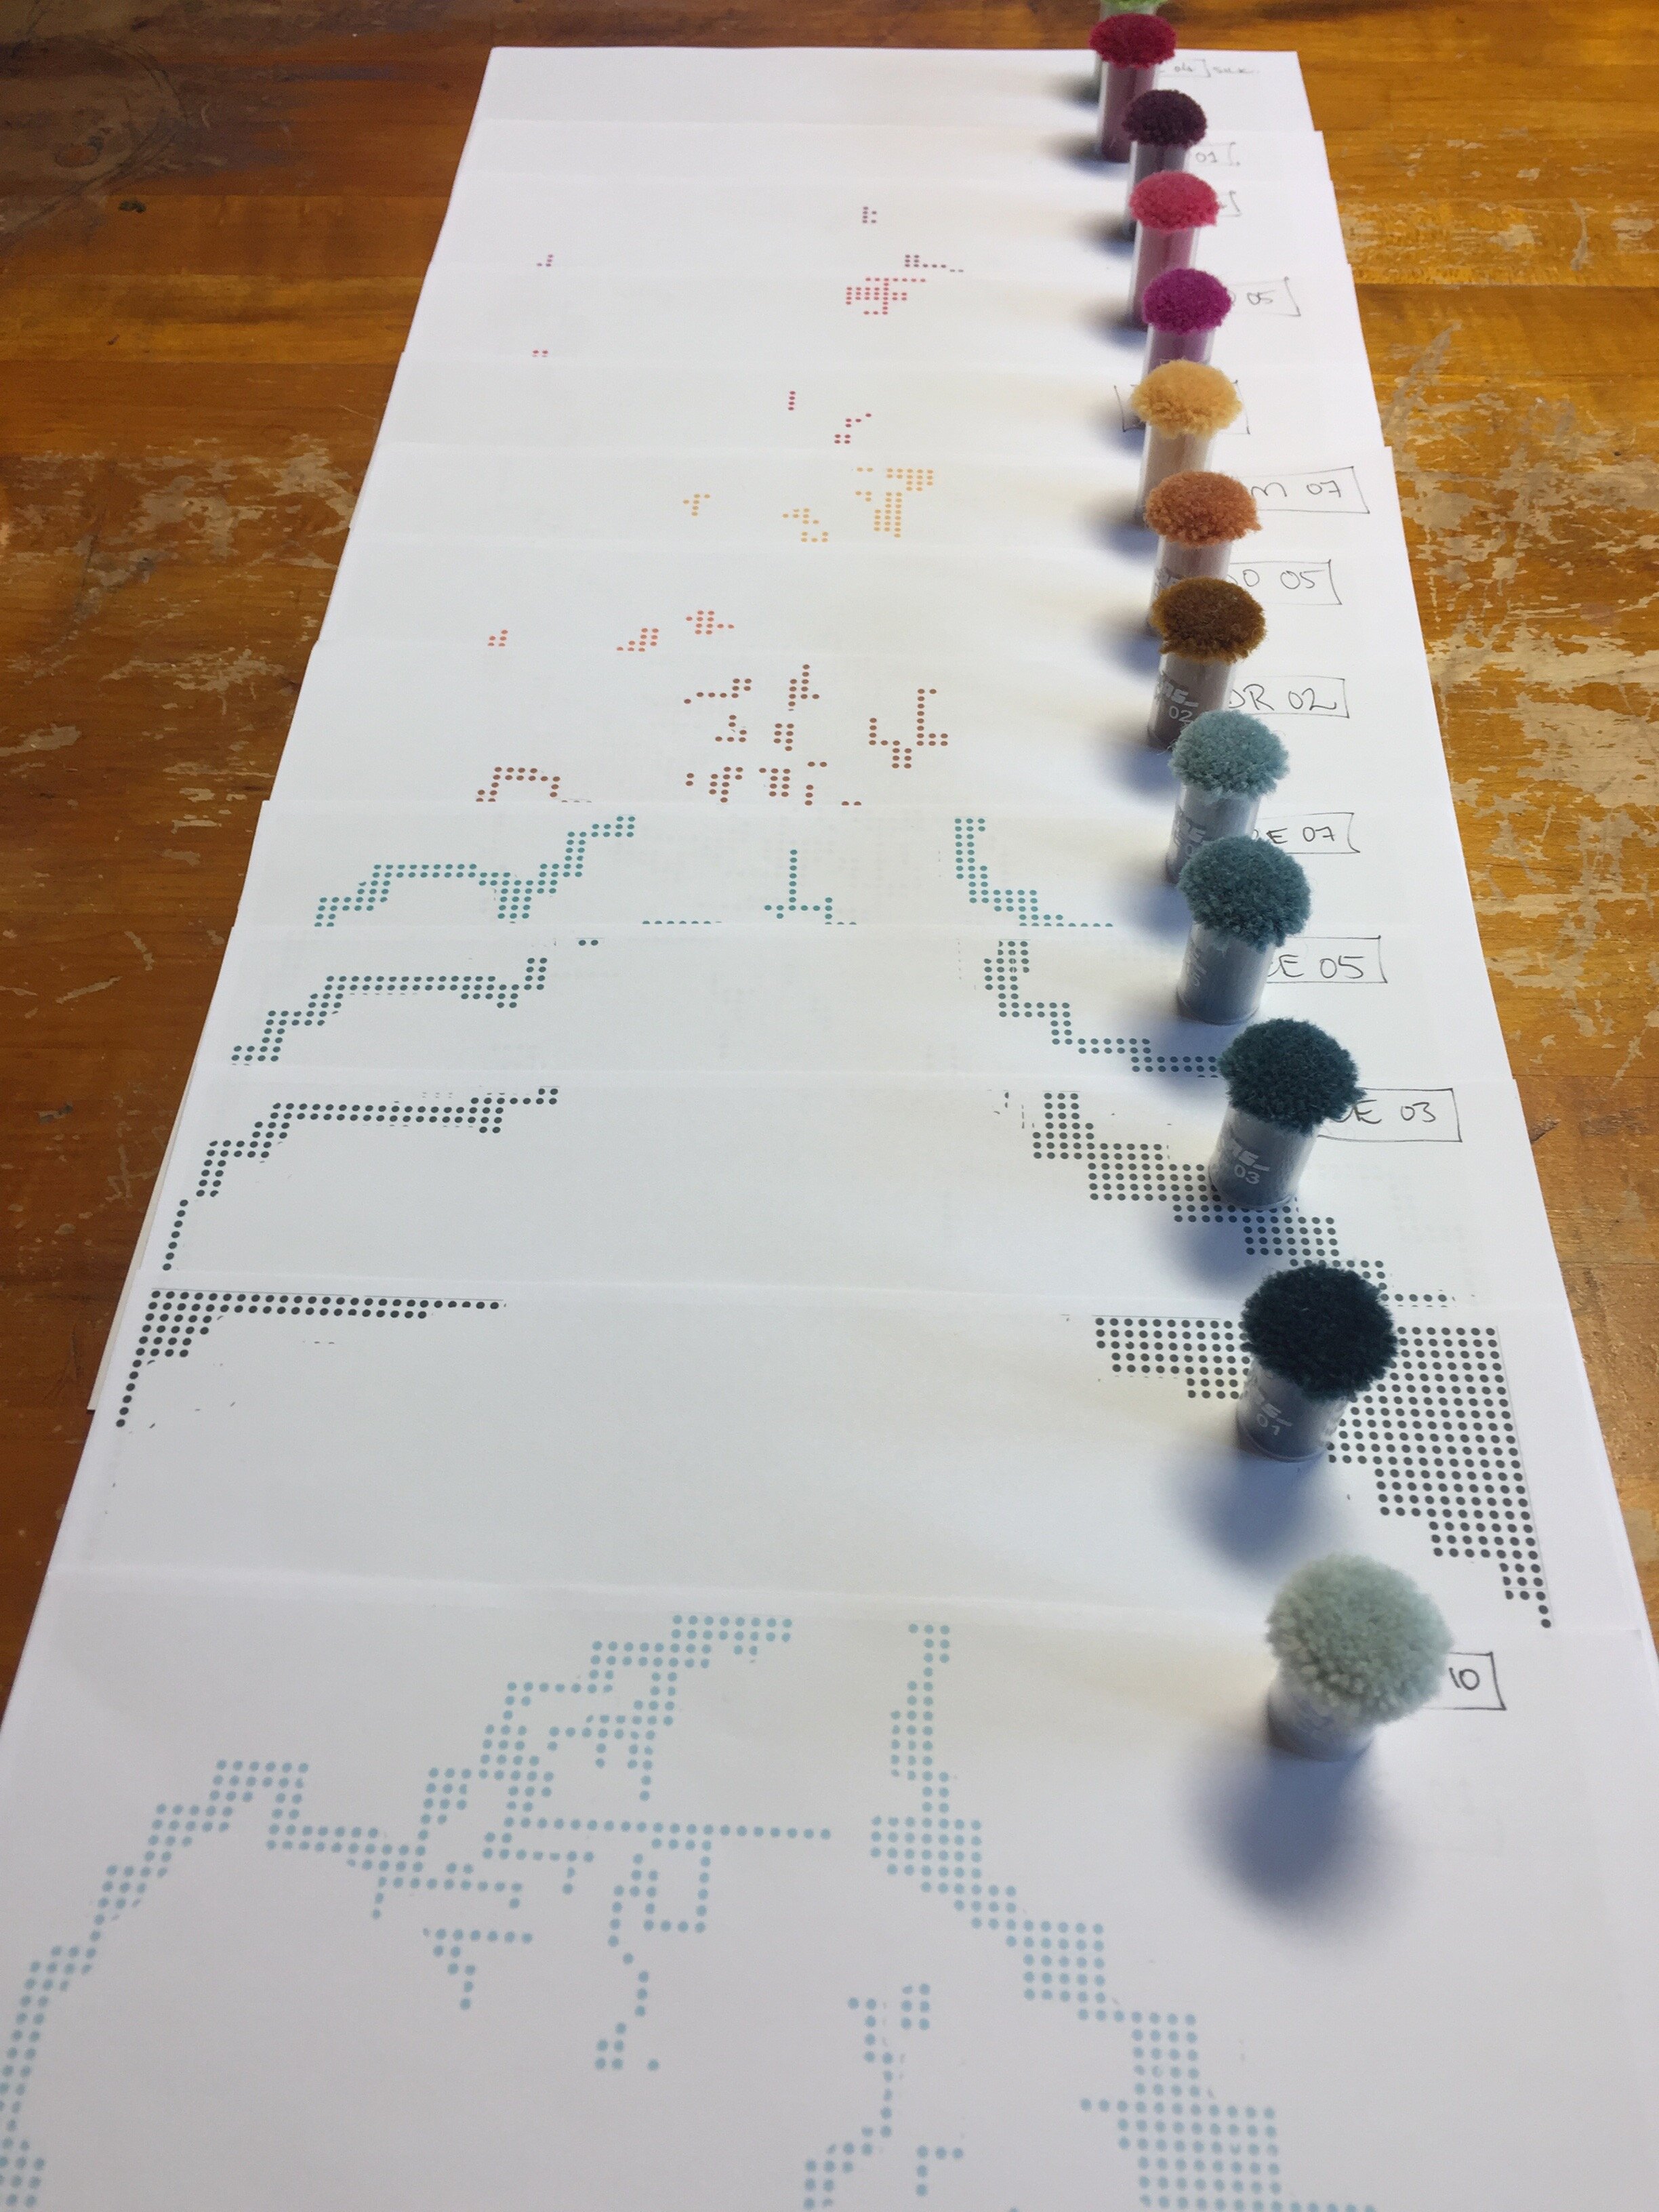  Selecting the carpet pom colours and organizing the sections of the Canada map for the “Oh Canada” Pom Mosaic™.  